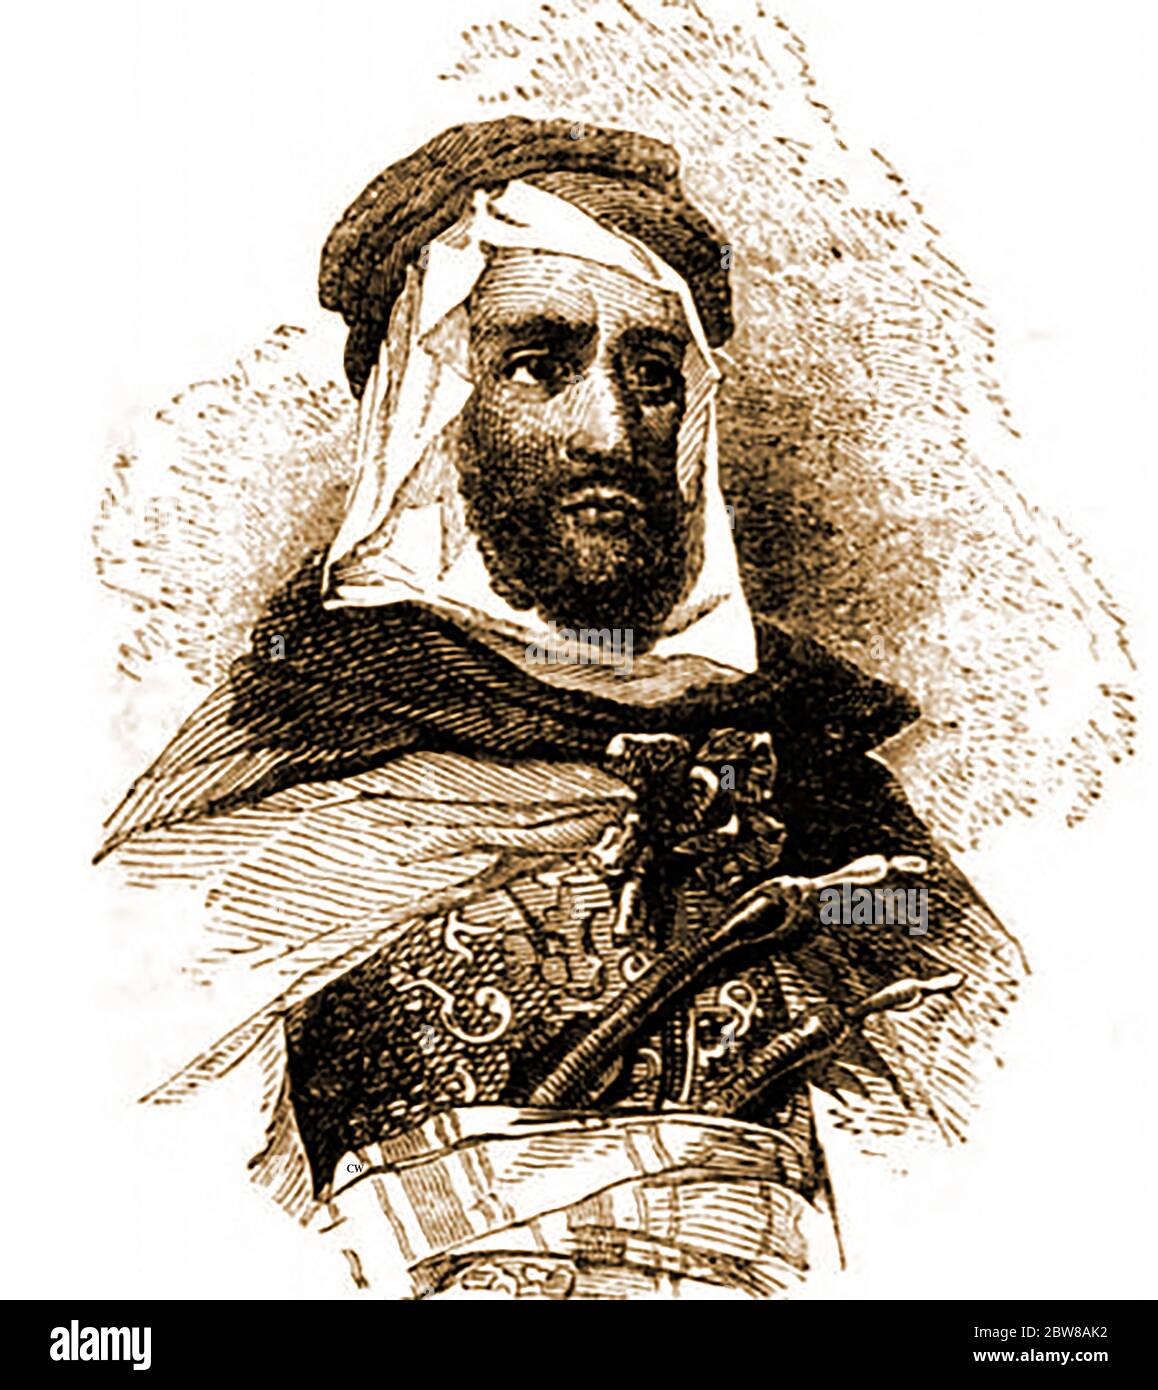 1842 portrait of Abdel el Kadar (also known as Abdelkader al-Jazairi, Abd al-Qādir ibn Muḥyiddīn,  Emir Abdelkader, and  Abdelkader El Djezairi) .  1808-1883 . He was an Algerian religious and military leader who led a struggle against the French colonial invasion in the mid-19th century. His adherence to human rights saw him regarded as 'Saint among the Princes and the Prince among the Saints'. His frugal way of life extended to living in a tent Stock Photo